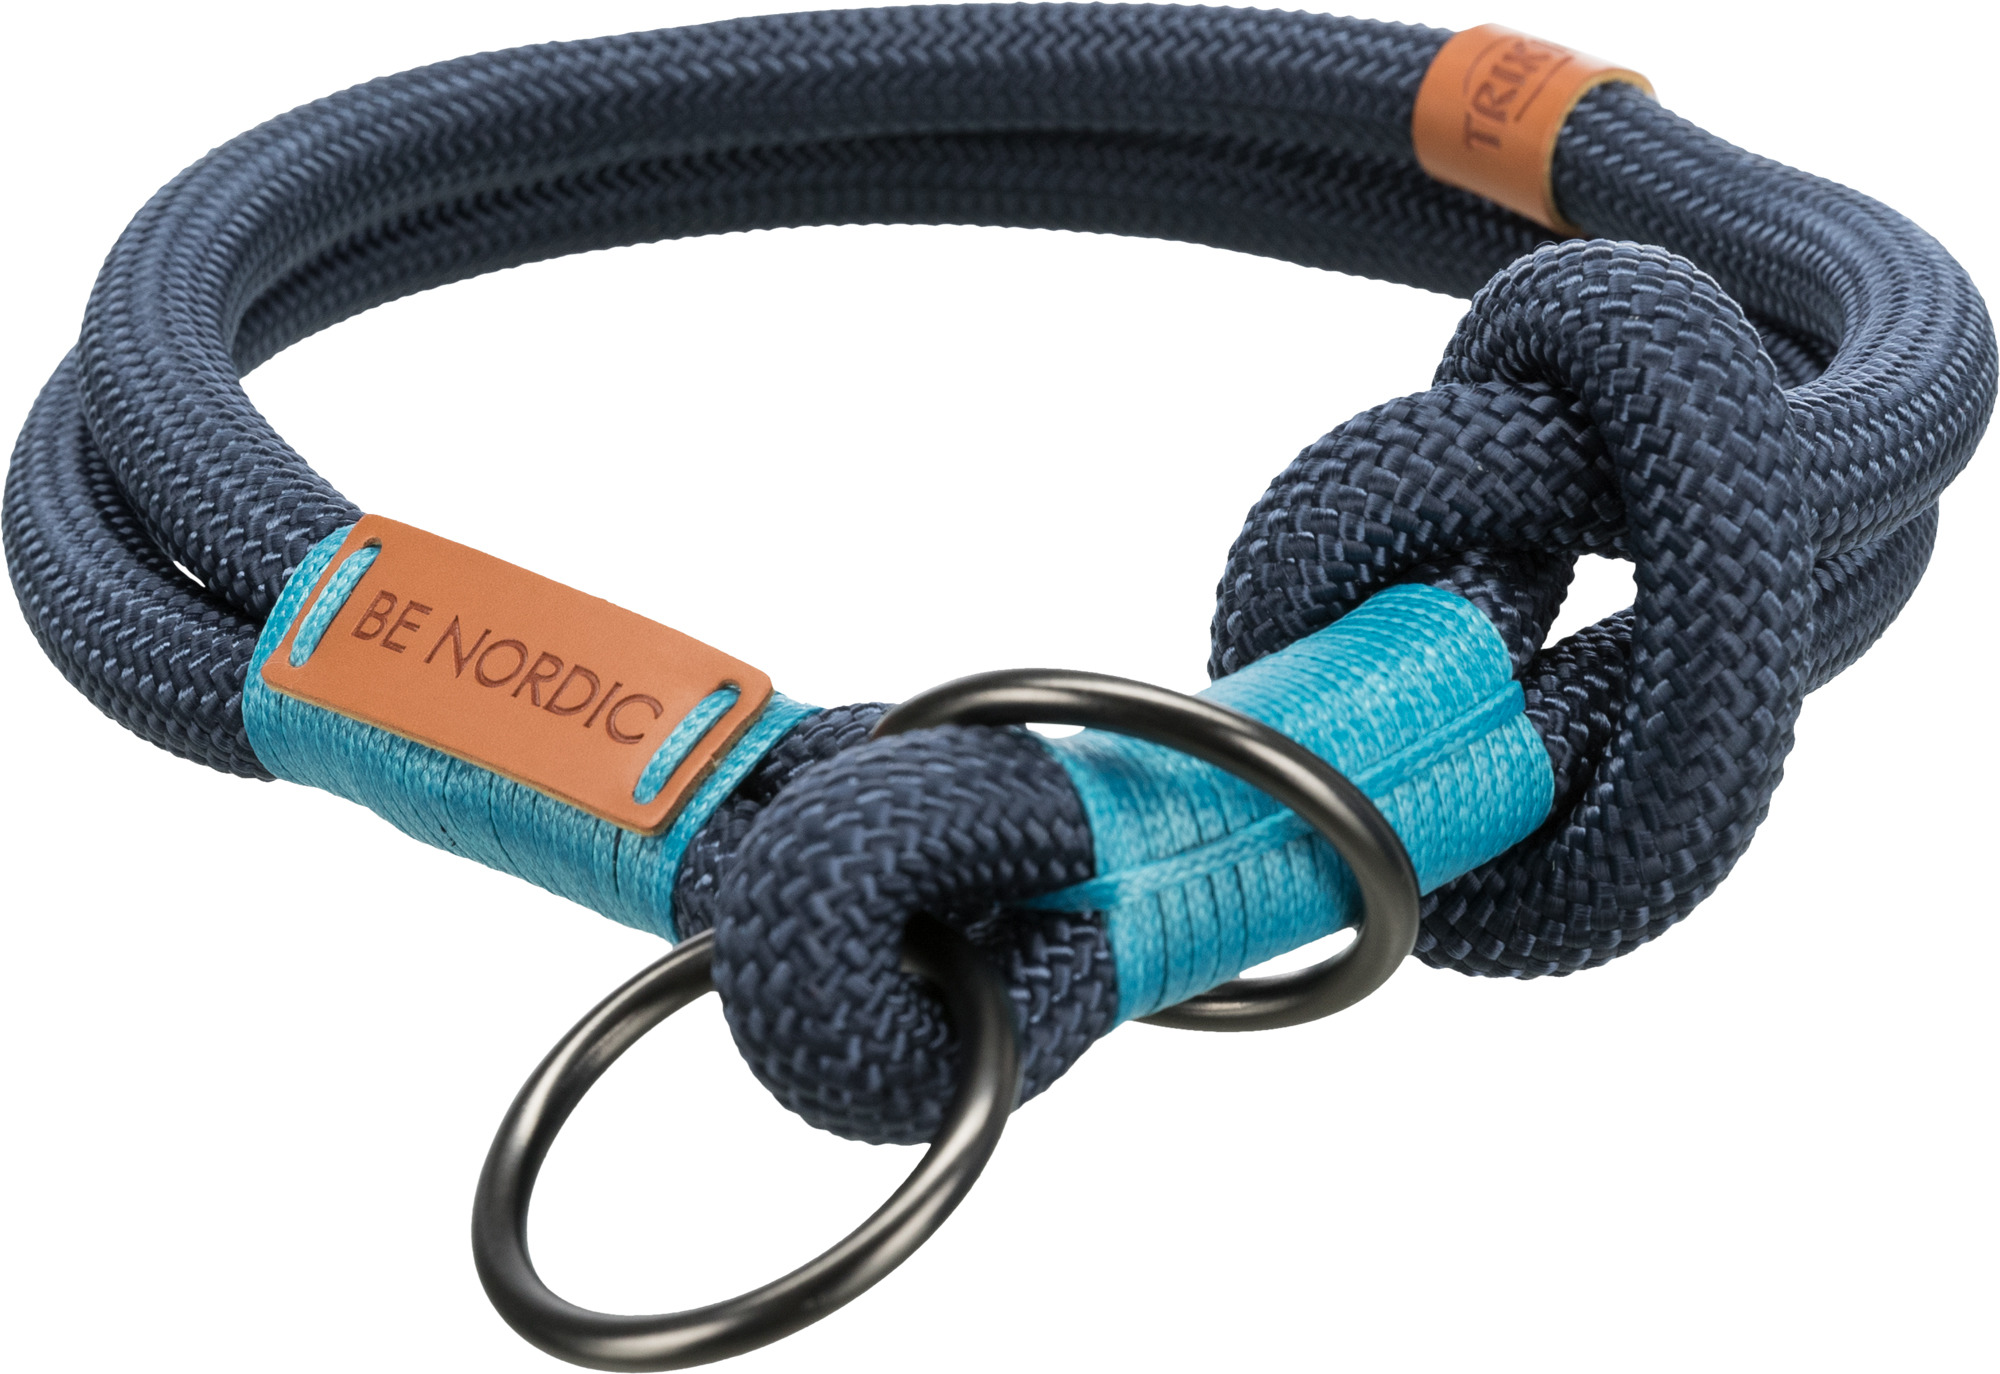 TRIXIE BE NORDIC Zug-Stopp-Halsband TRIXIE BE NORDIC Zug-Stopp-Halsband, L: 50 cm/ø 13 mm, dunkelblau/hellblau